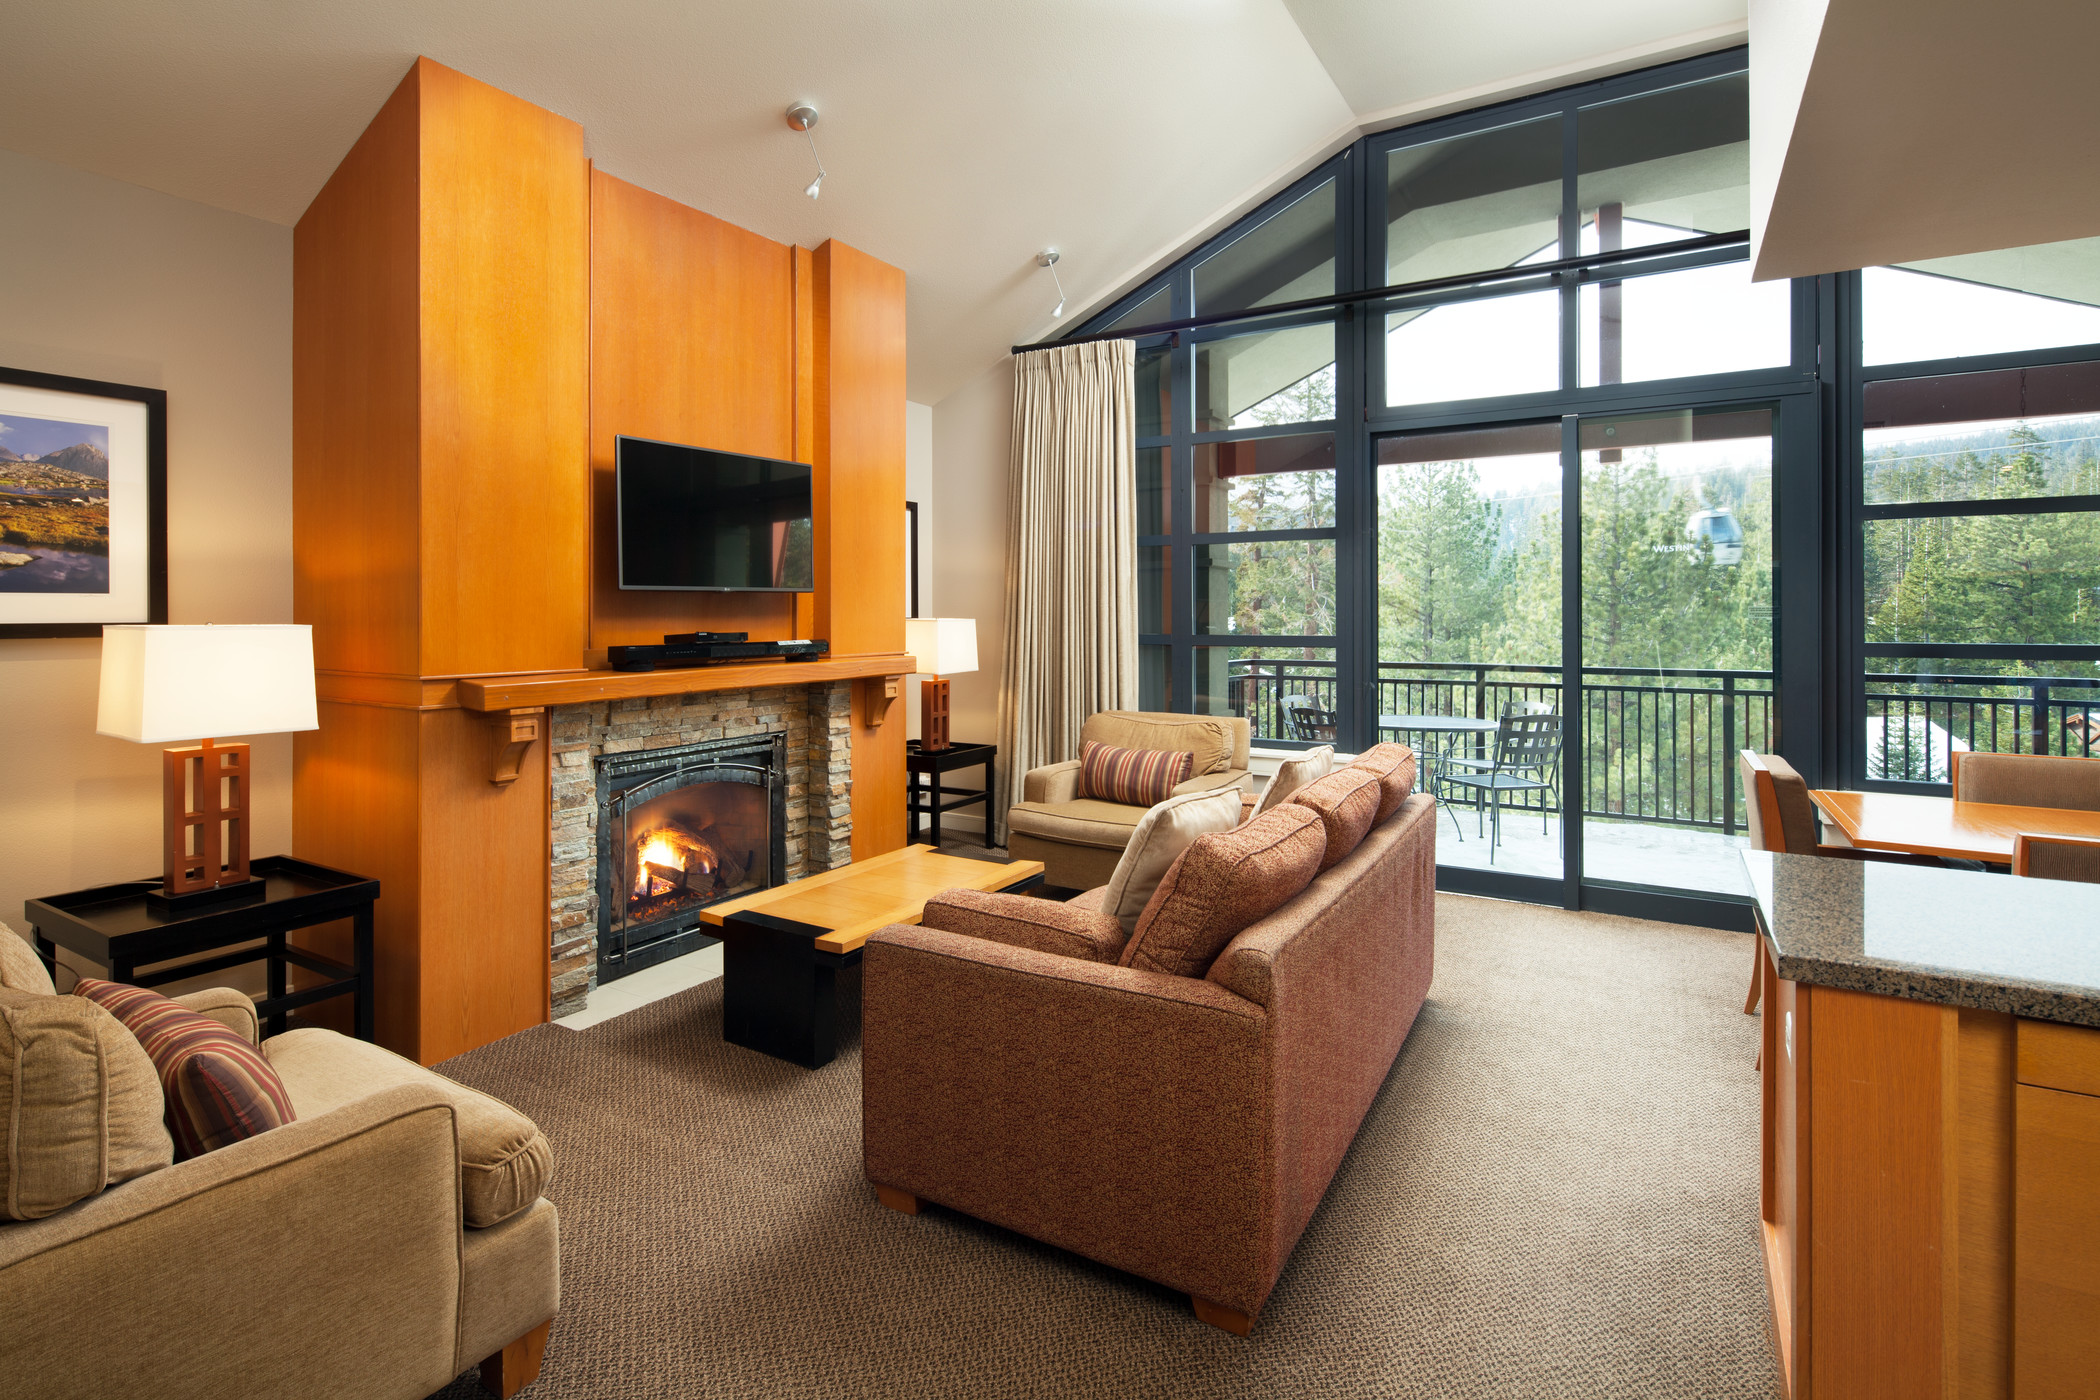 Modern living and dining areas with fireplace, window wall and balcony